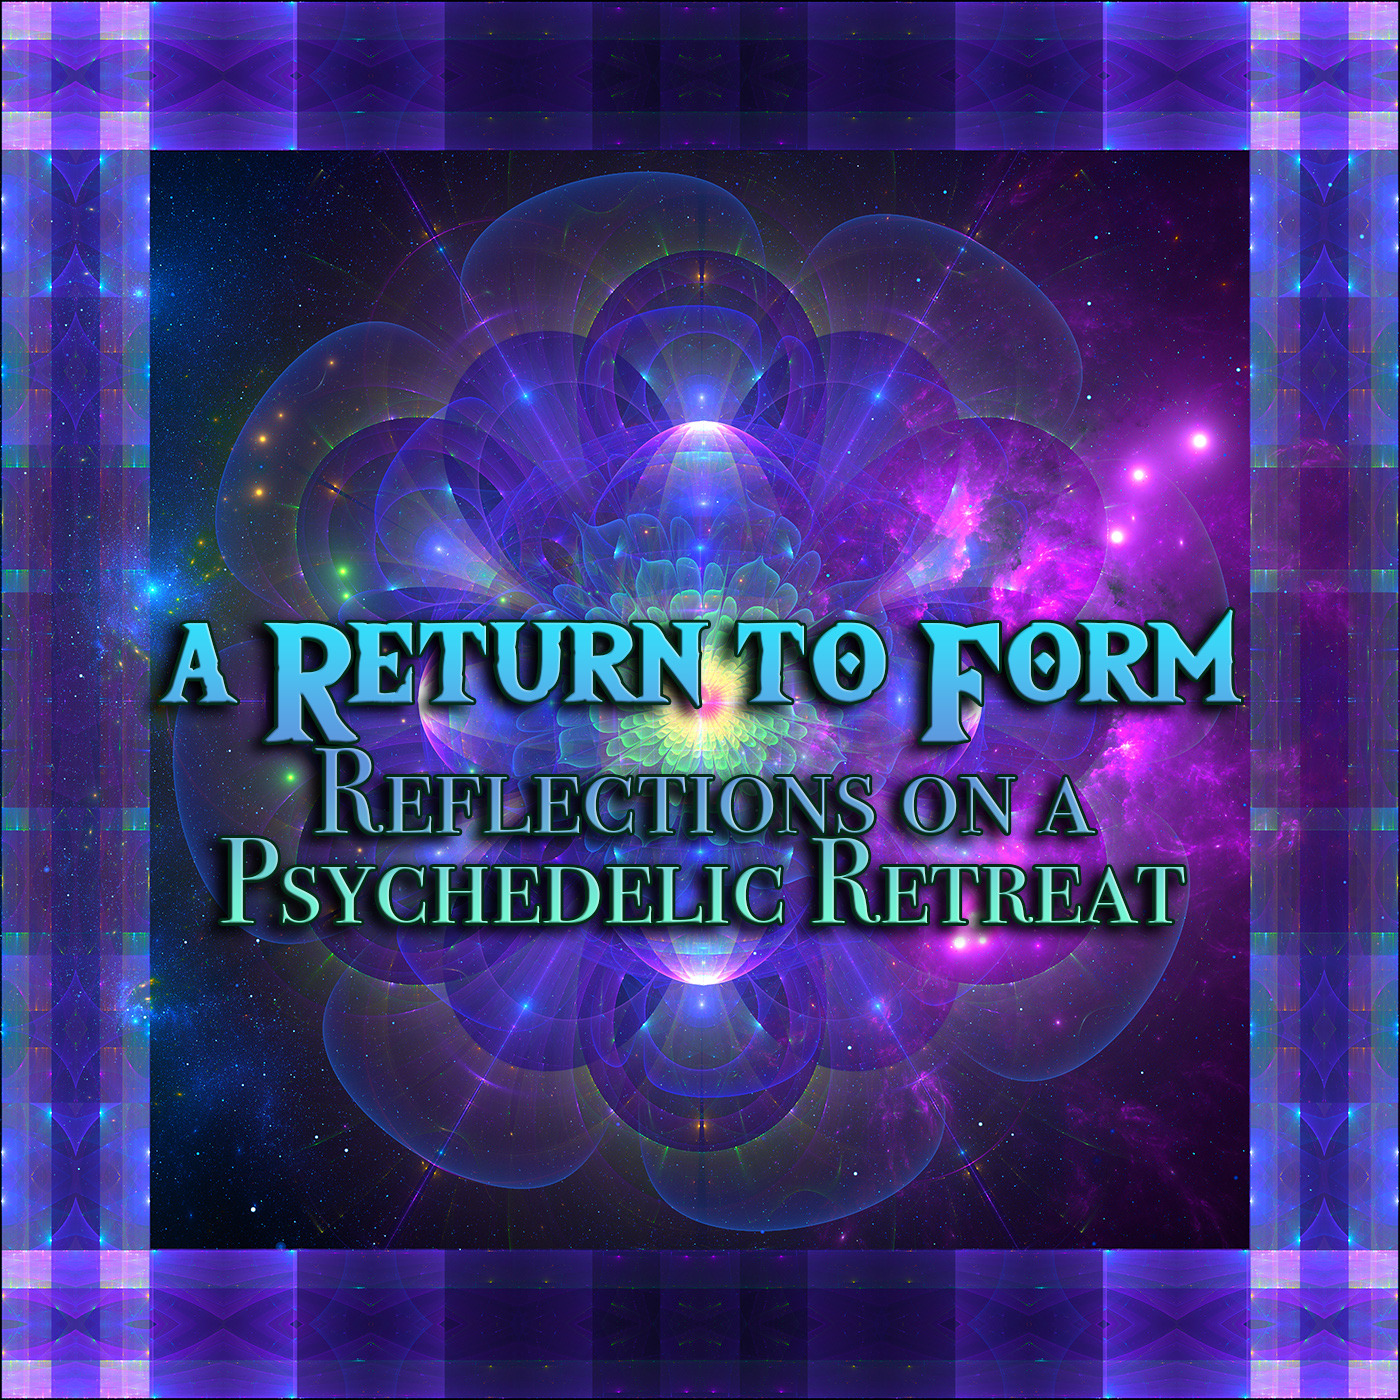 Episode 261: A Return to Form: Reflections on a Psychedelic Retreat